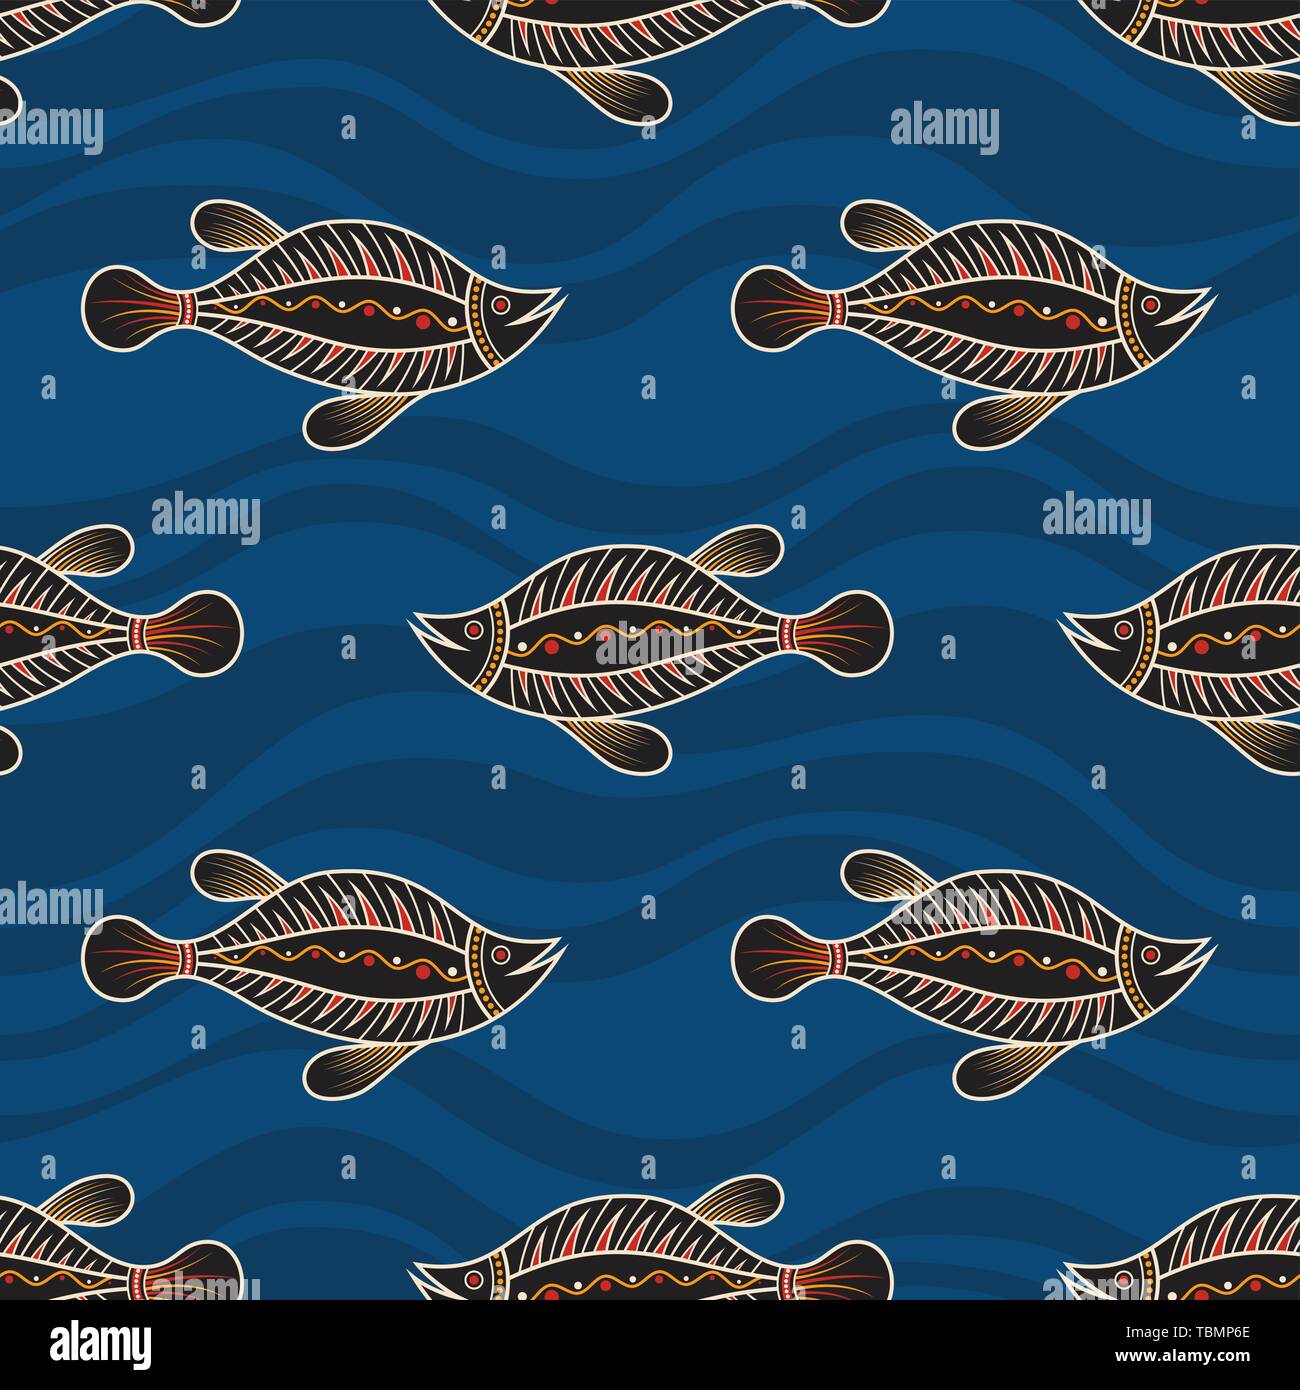 Seamless pattern of fishes with abstract waves on background. Australian art. Aboriginal painting style. Vector color background. Stock Vector